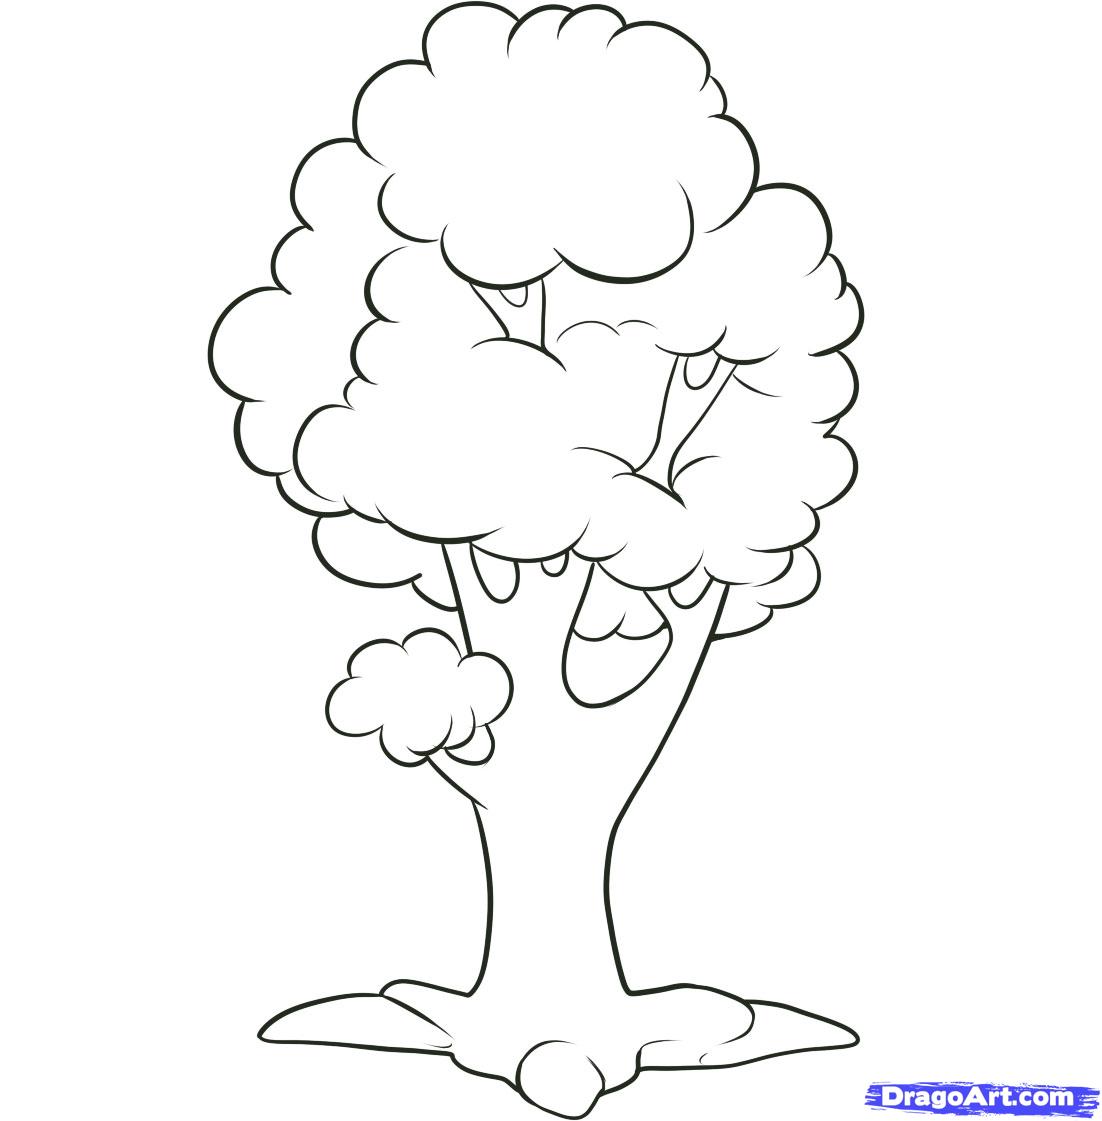 How to Draw an Easy Tree, Step by Step, Trees, Pop Culture, FREE ...